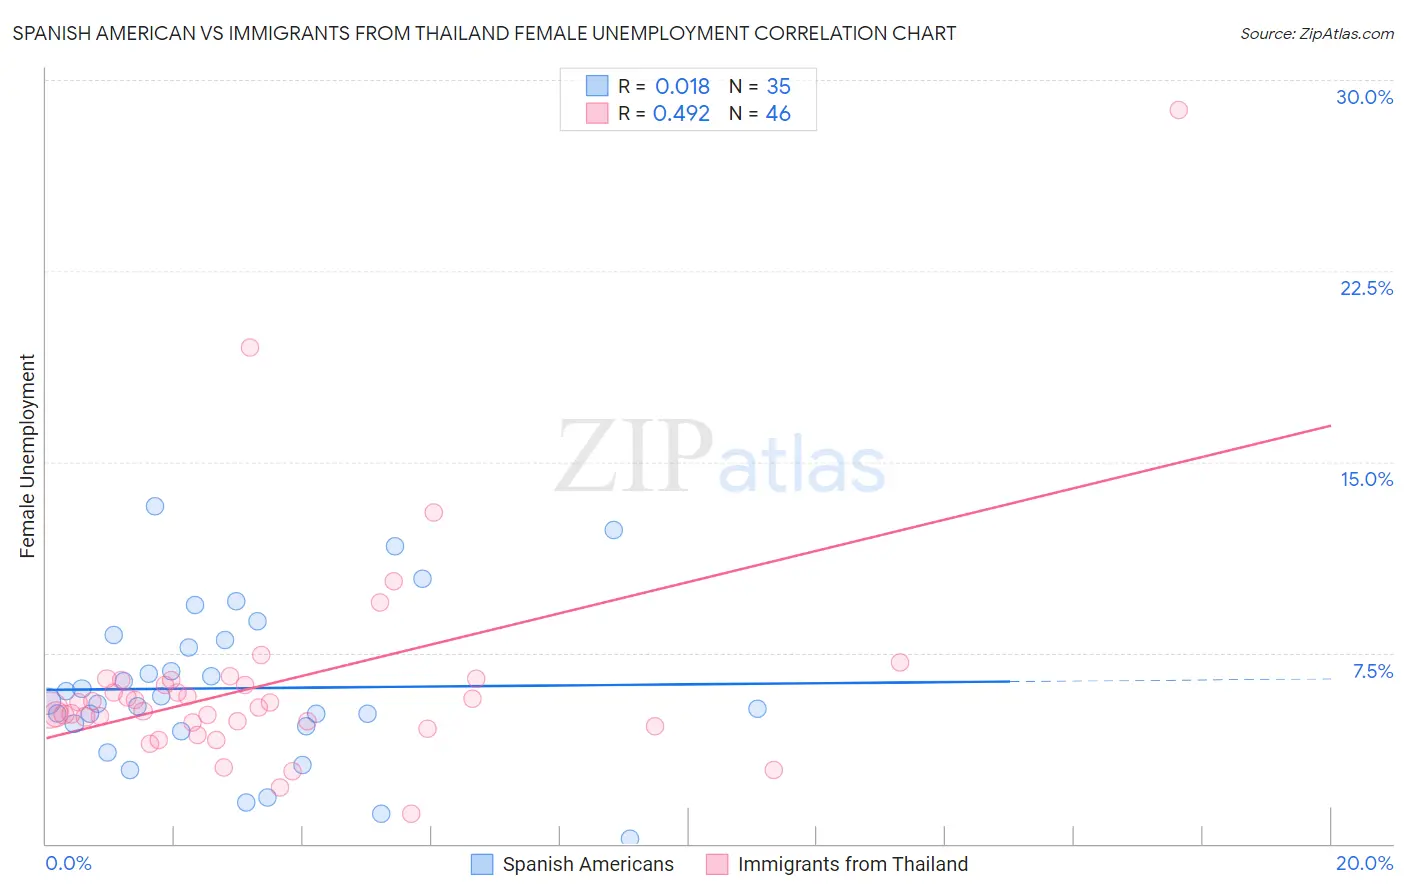 Spanish American vs Immigrants from Thailand Female Unemployment